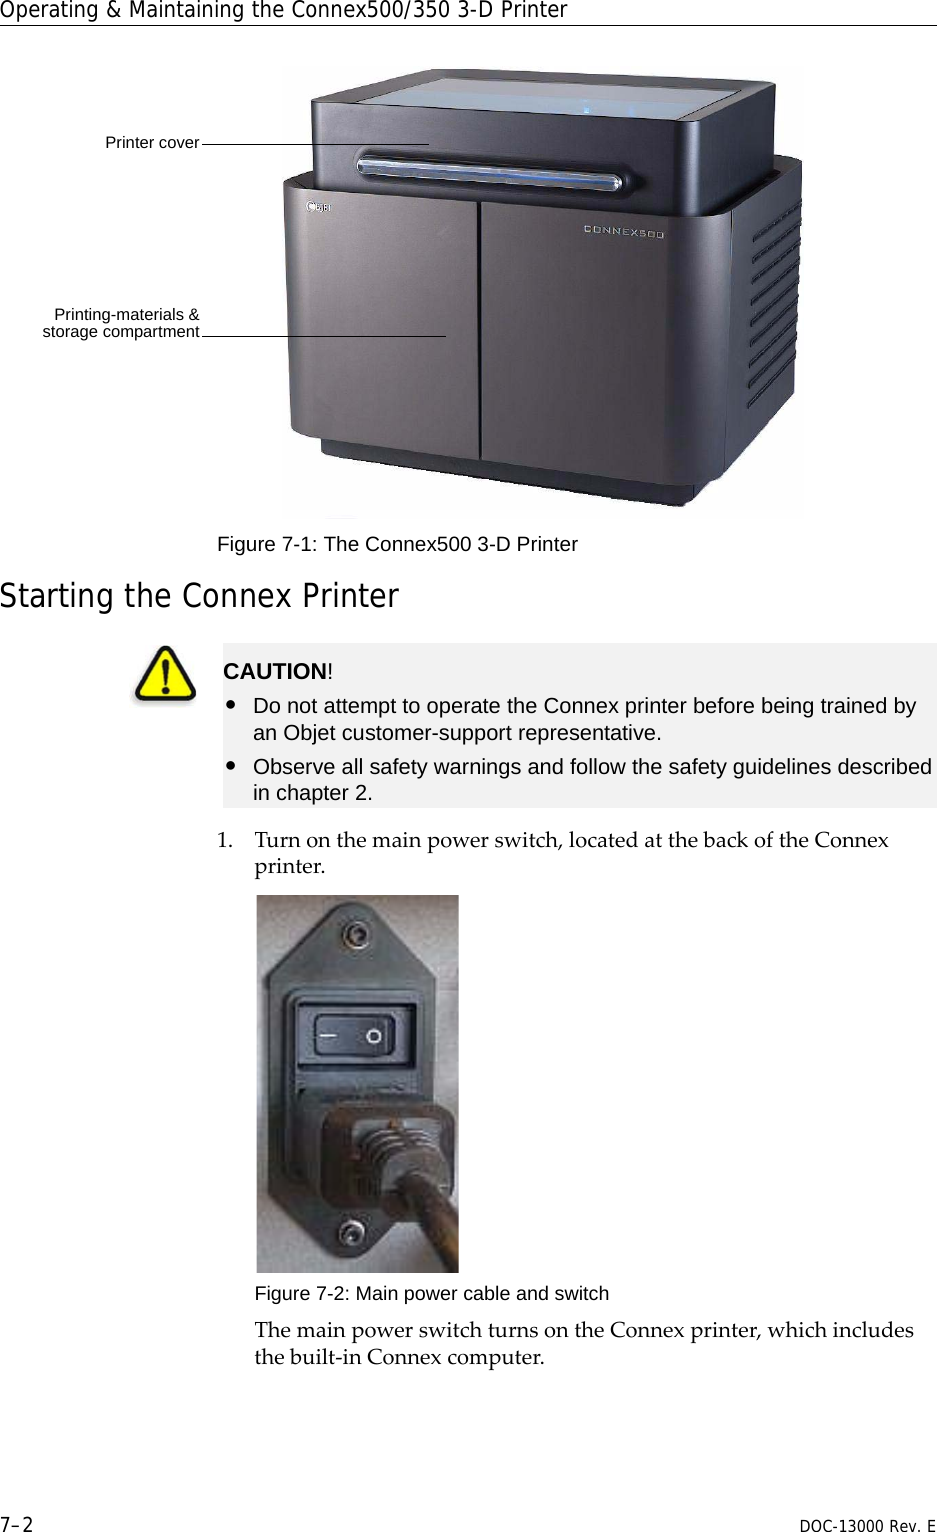 Operating &amp; Maintaining the Connex500/350 3-D Printer7–2 DOC-13000 Rev. EFigure 7-1: The Connex500 3-D Printer Starting the Connex Printer1. Turnonthemainpowerswitch,locatedatthebackoftheConnexprinter.Figure 7-2: Main power cable and switchThemainpowerswitchturnsontheConnexprinter,whichincludesthebuilt‐inConnexcomputer.Printer coverPrinting-materials &amp;storage compartmentCAUTION!•Do not attempt to operate the Connex printer before being trained by an Objet customer-support representative.•Observe all safety warnings and follow the safety guidelines described in chapter 2.